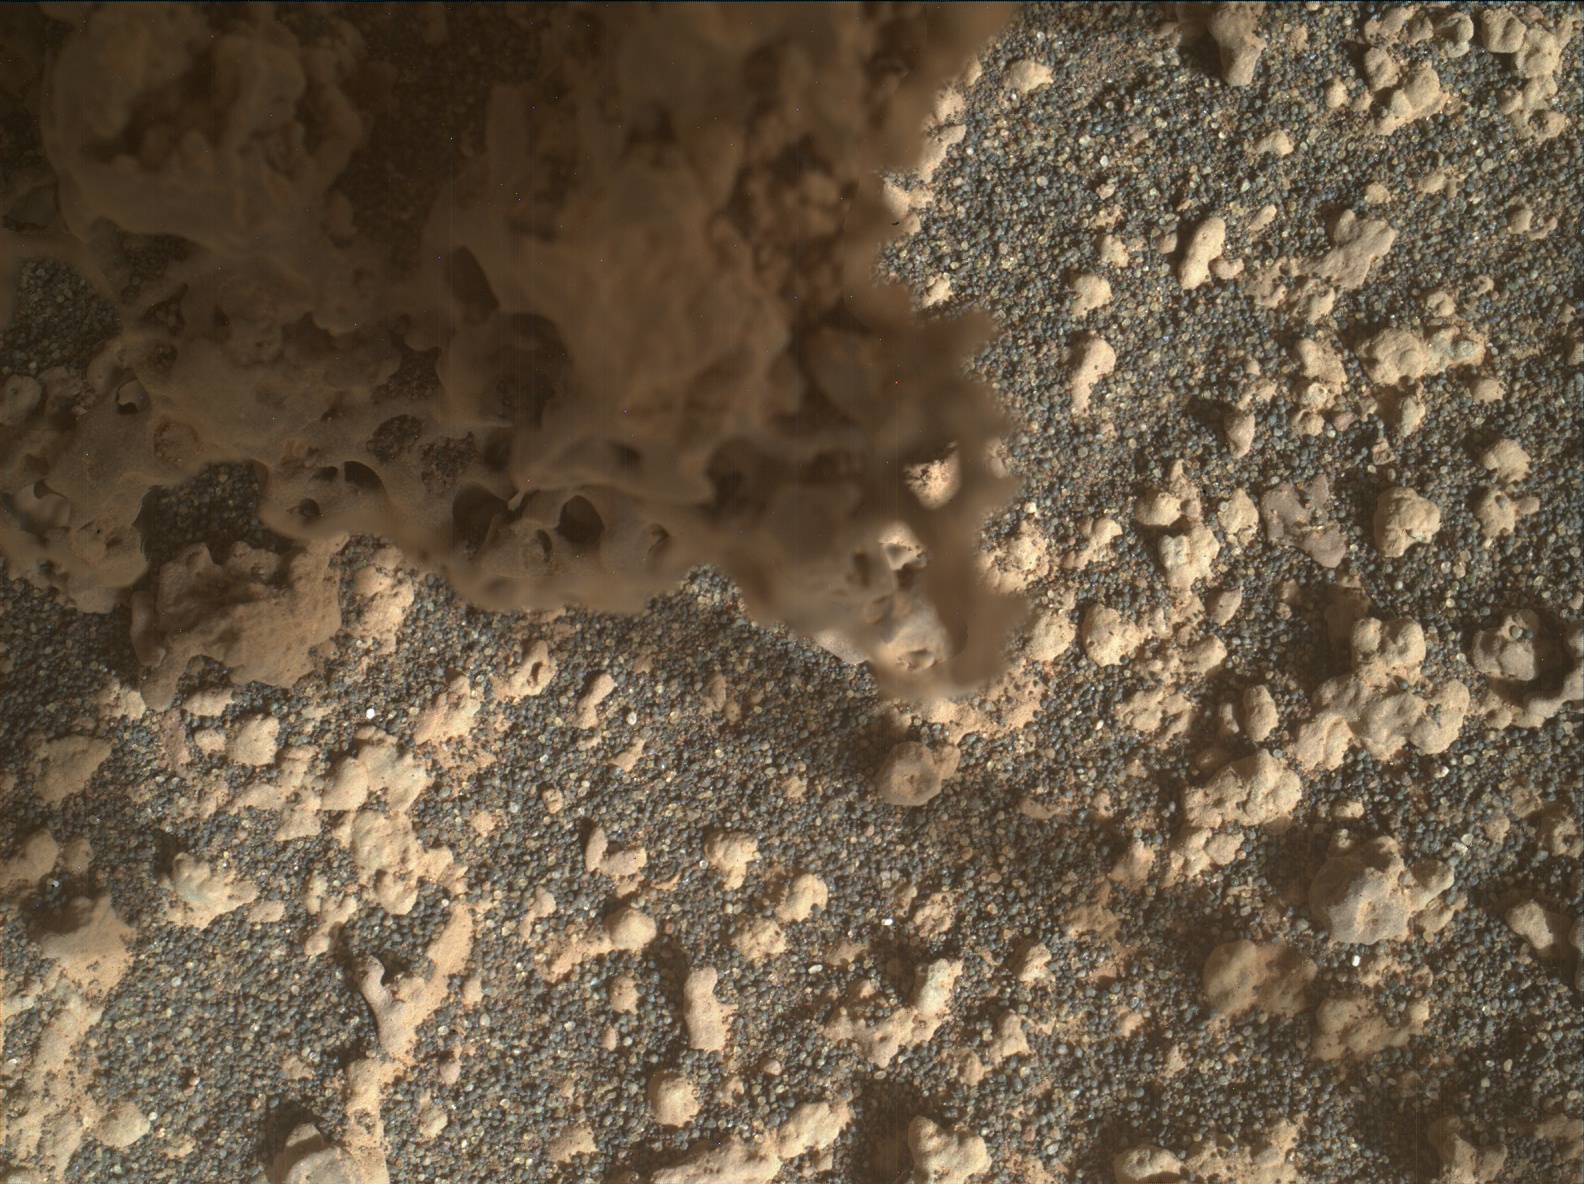 Nasa's Mars rover Curiosity acquired this image using its Mars Hand Lens Imager (MAHLI) on Sol 3574